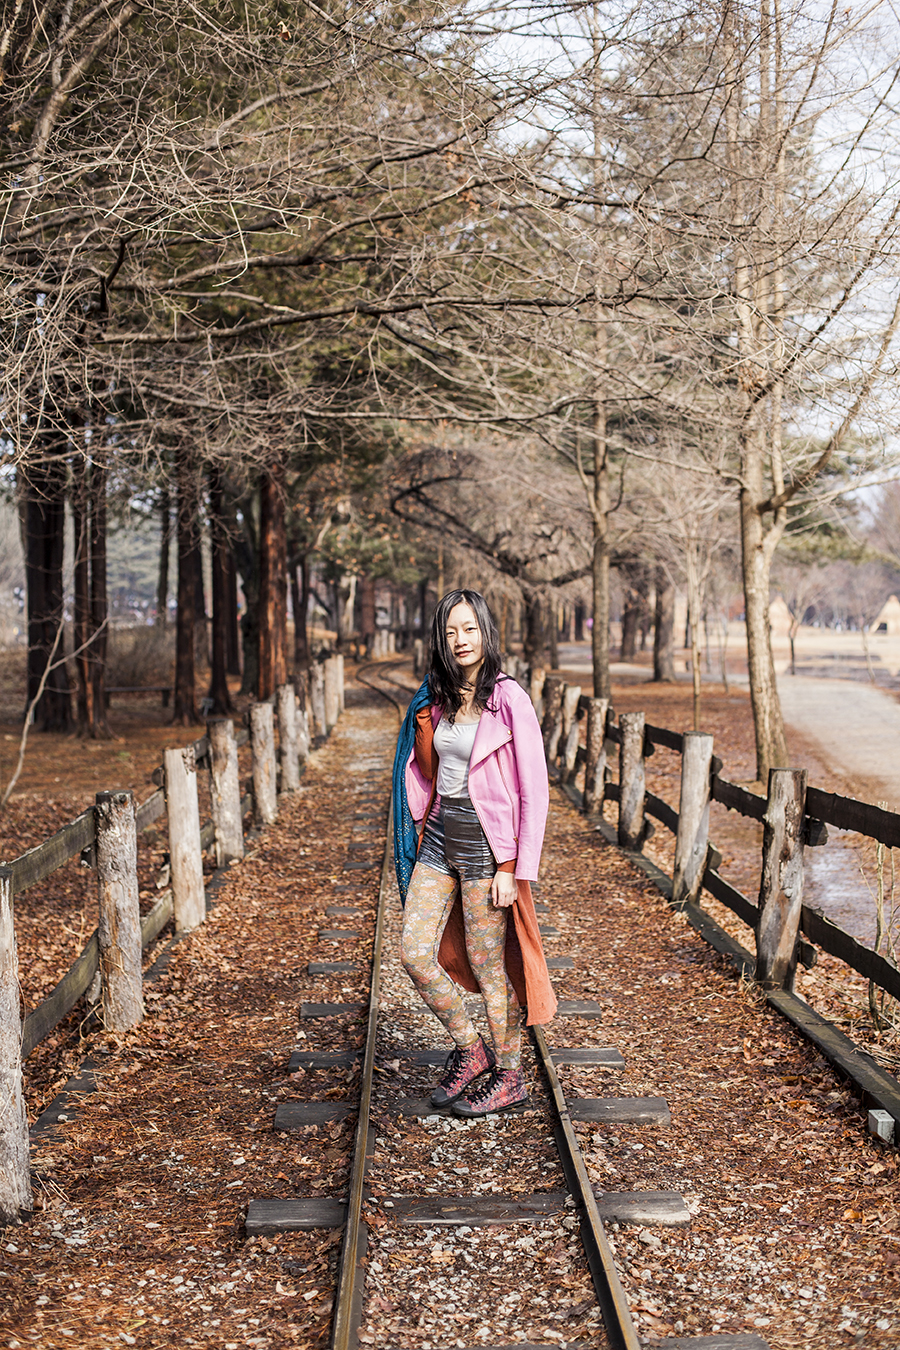 Outfit at Nami Island: Uniqlo grey bratop camisole, Viparo pink lambskin leather jacket with gold zipper, Forever 21 silver party shorts and long rust cardigan, Urban Outfitters floral lace tights, H&M grey men's coat, Marshalls blue shawl with gold studs.